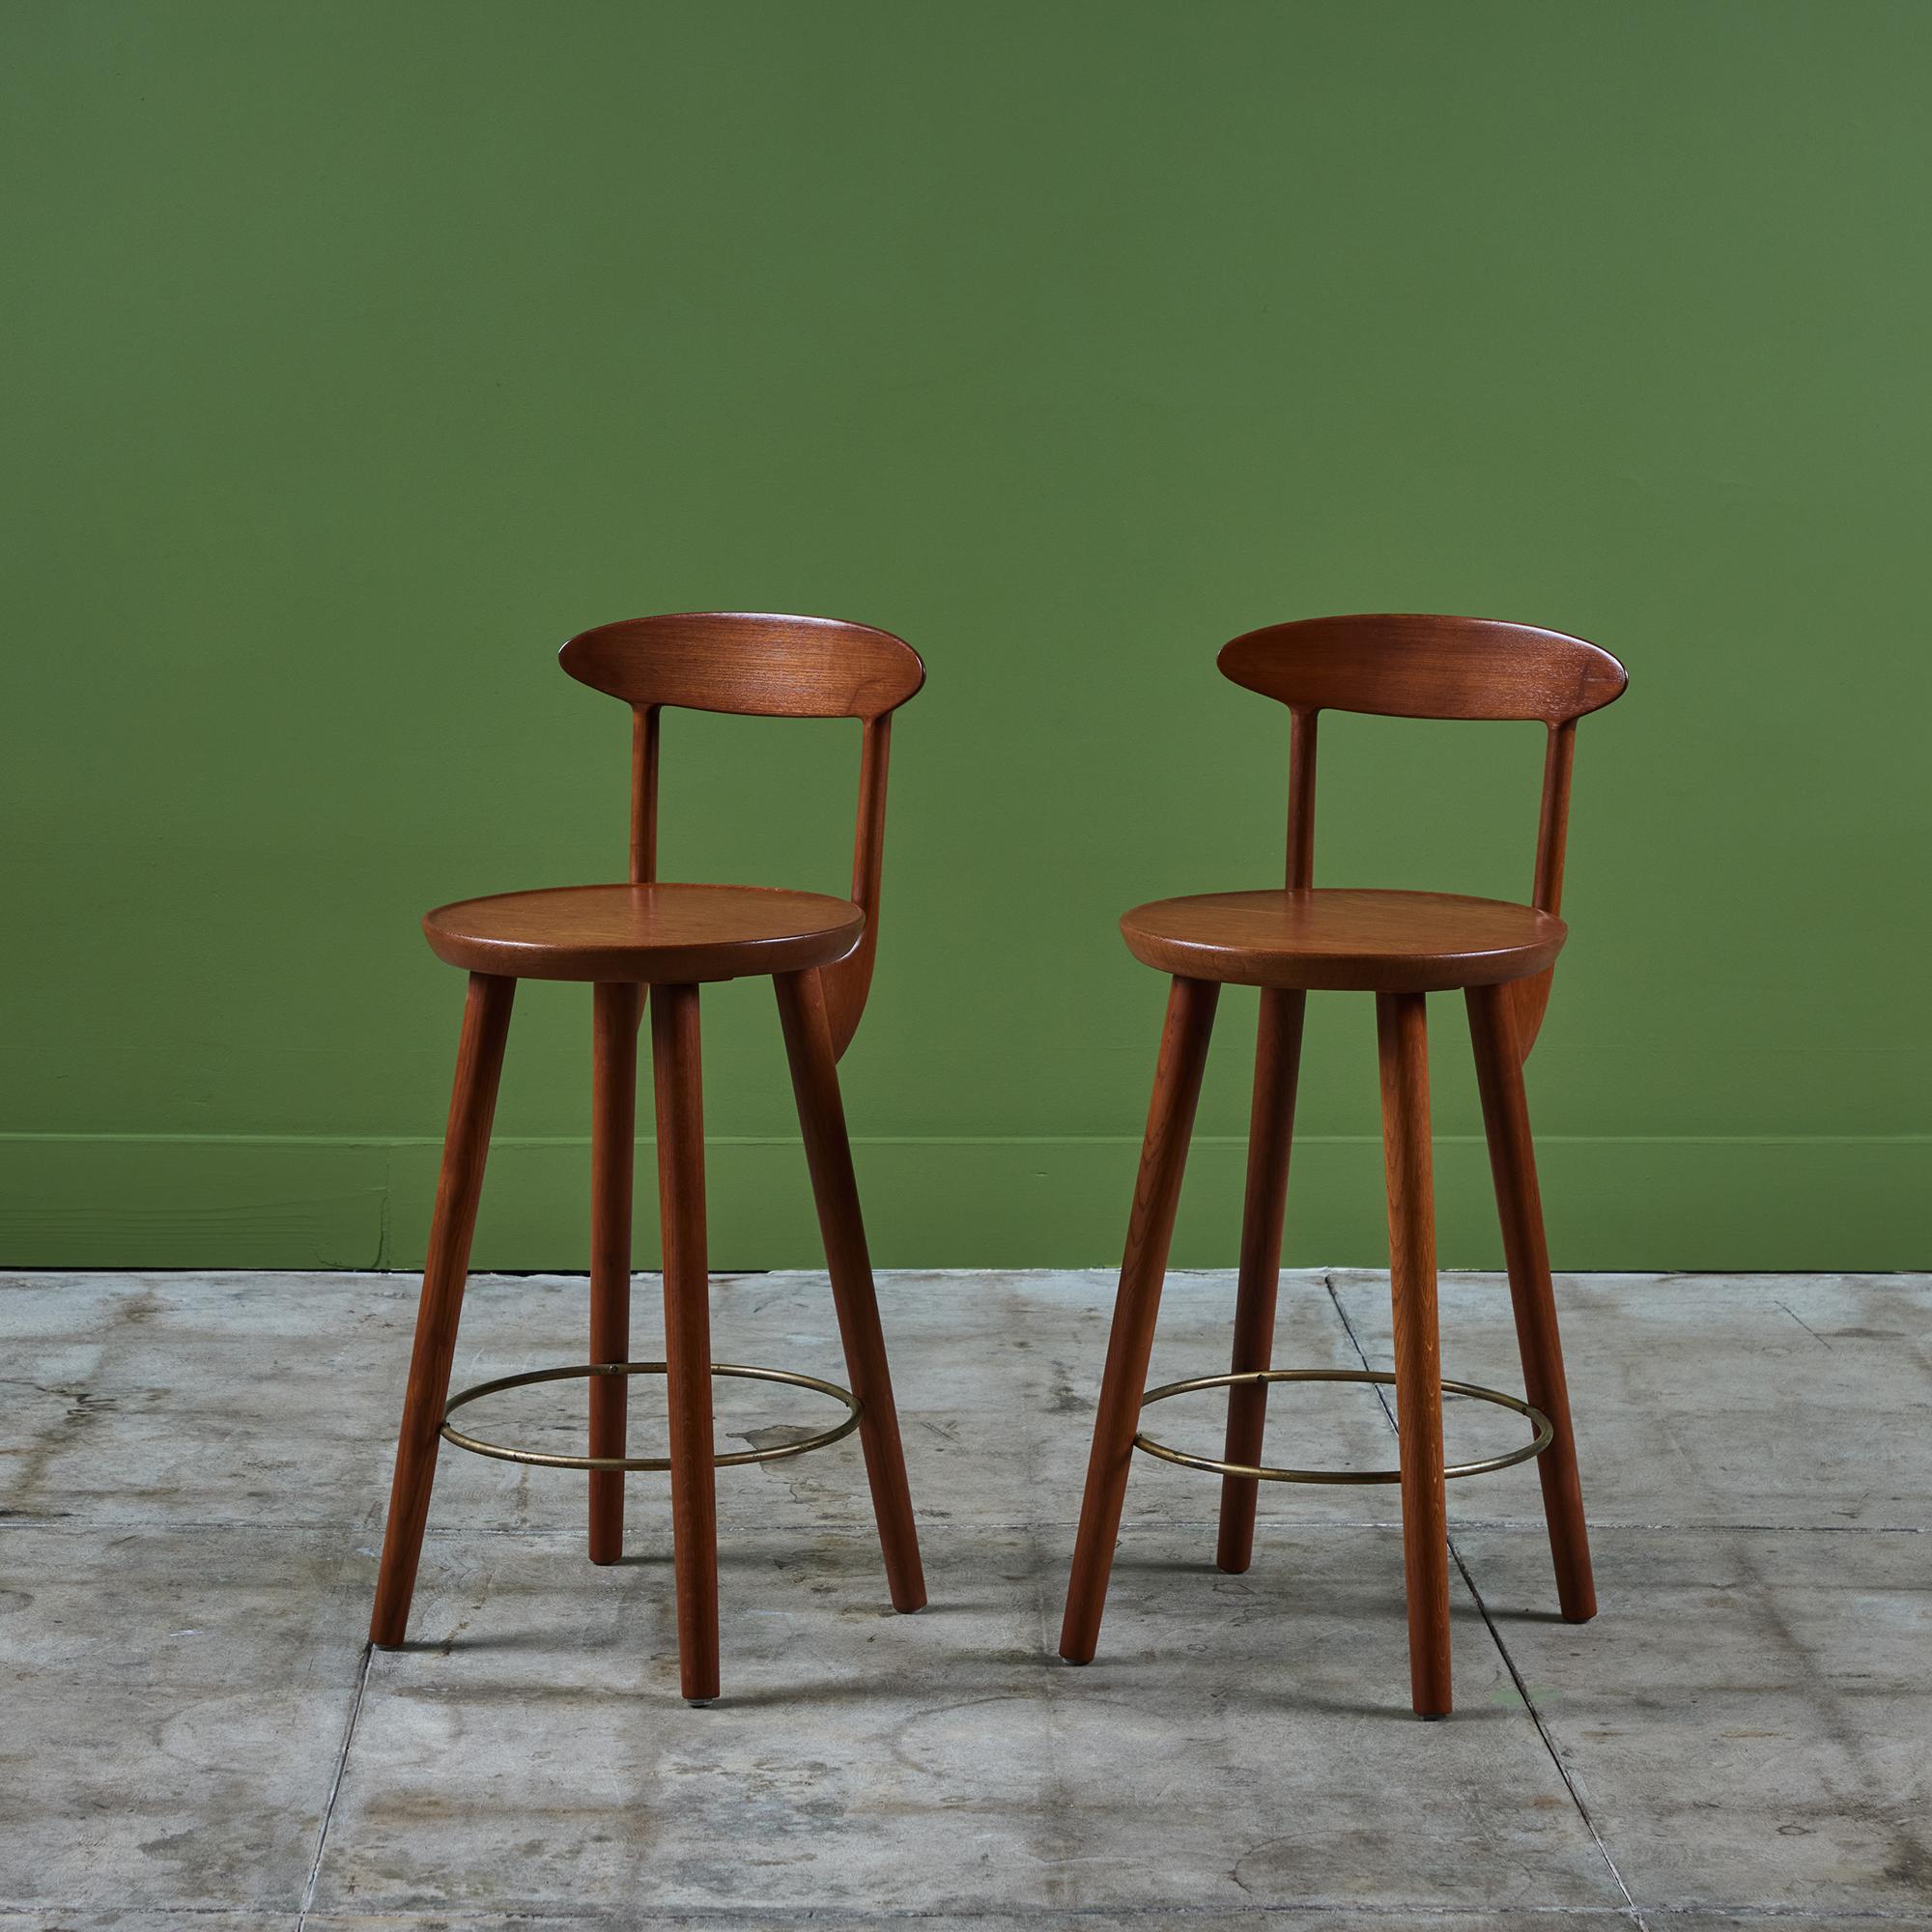 Pair of teak stools by Danish born designer Kurt Østervig for Brande Mobelindustri, c.1960s, Denmark. The stools feature a round seat and curved seat back. Each stool has four long splayed legs with a circular brass foot bar.

Dimensions
14